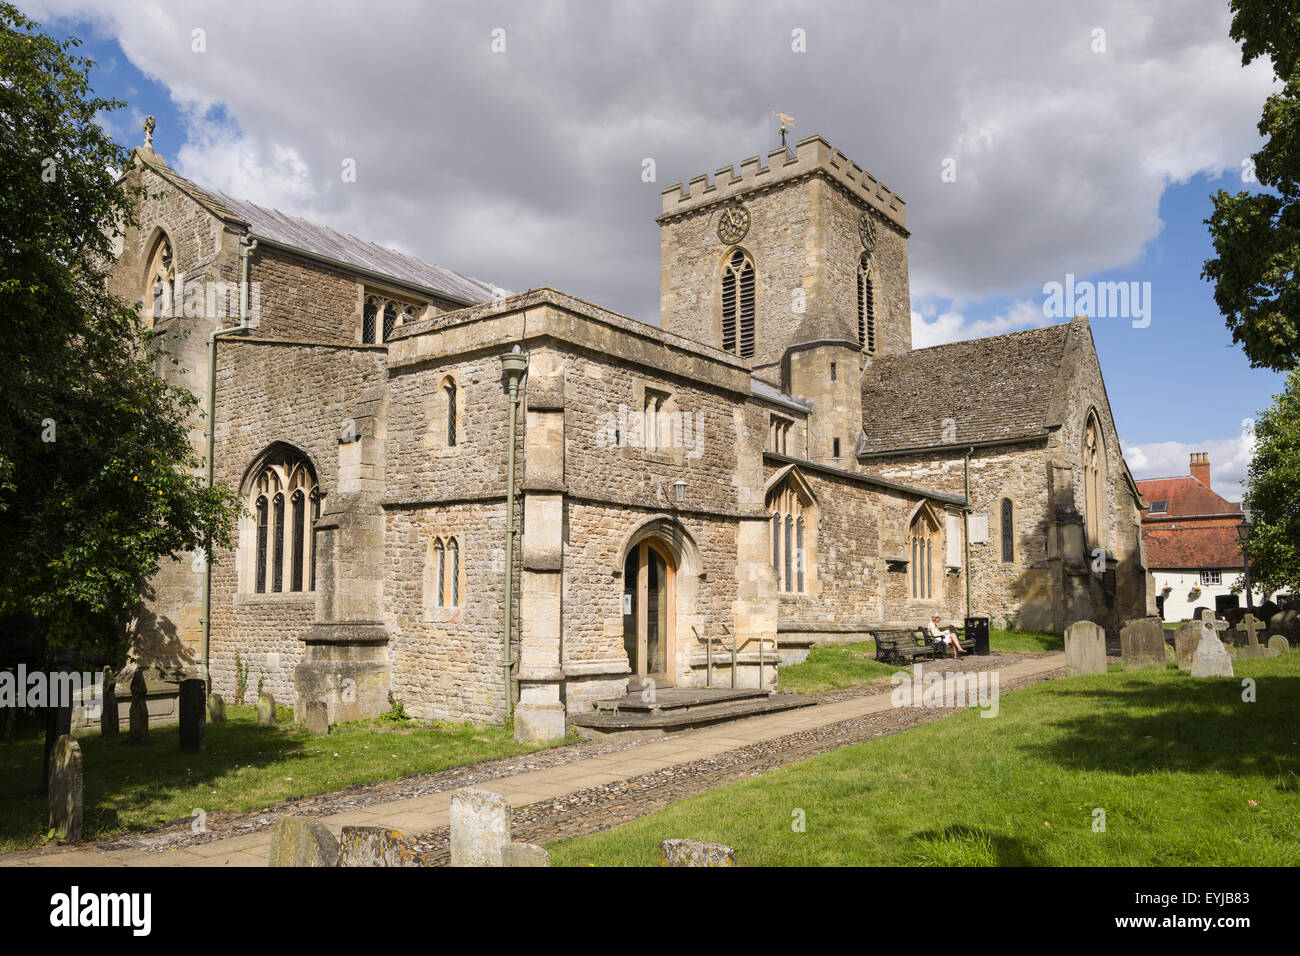 The Parish Church of St. Peter and St. Paul in Wantage, Oxfordshire,England,U.K. Stock Photo